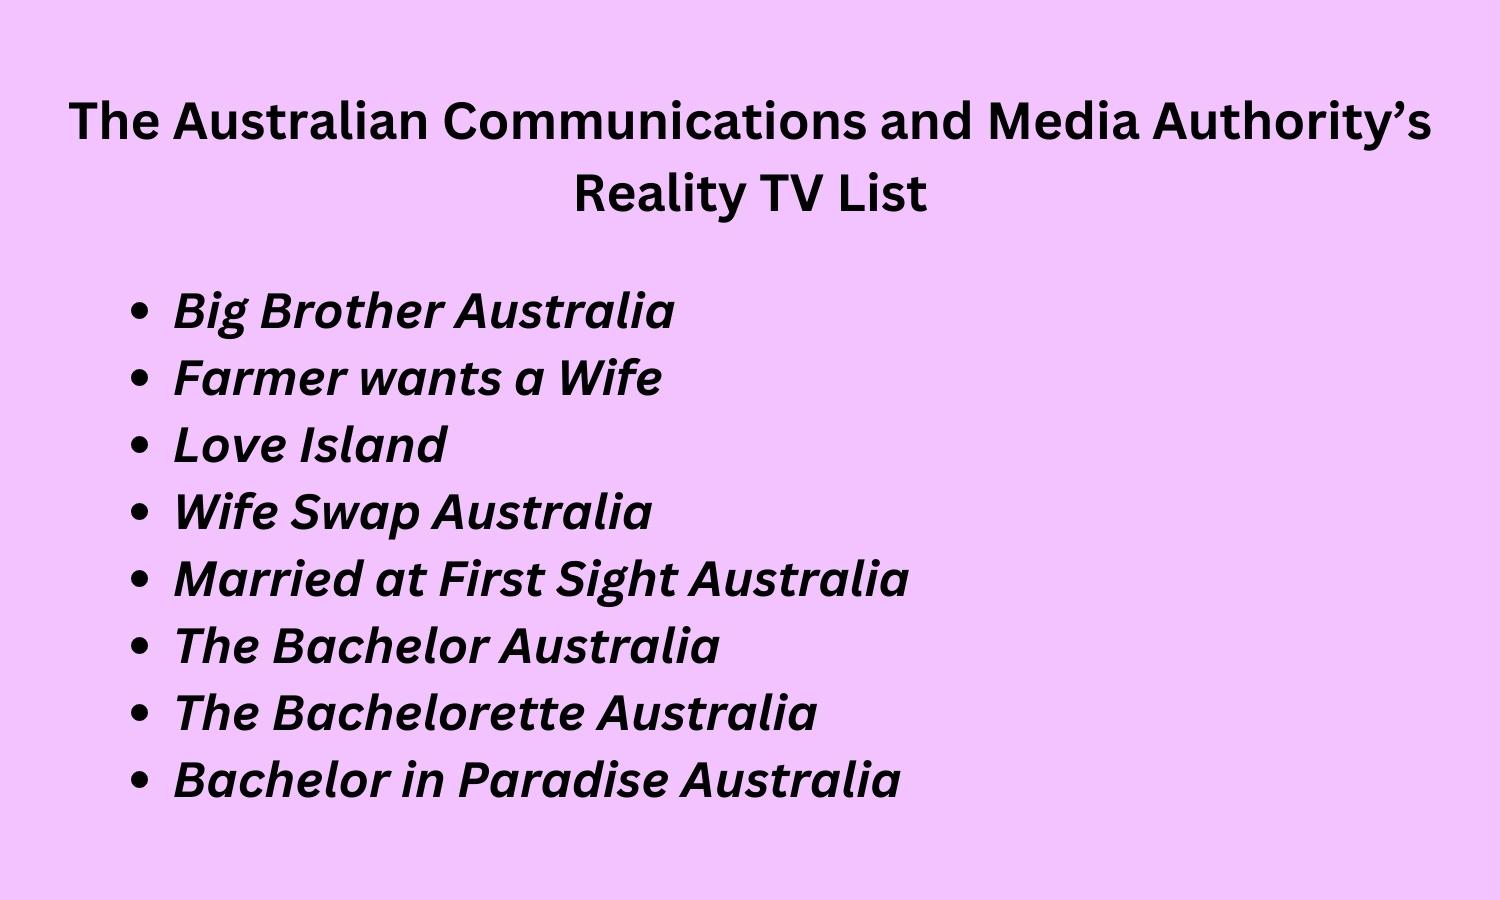 The Australian Communications and Media Authority’s Reality TV List